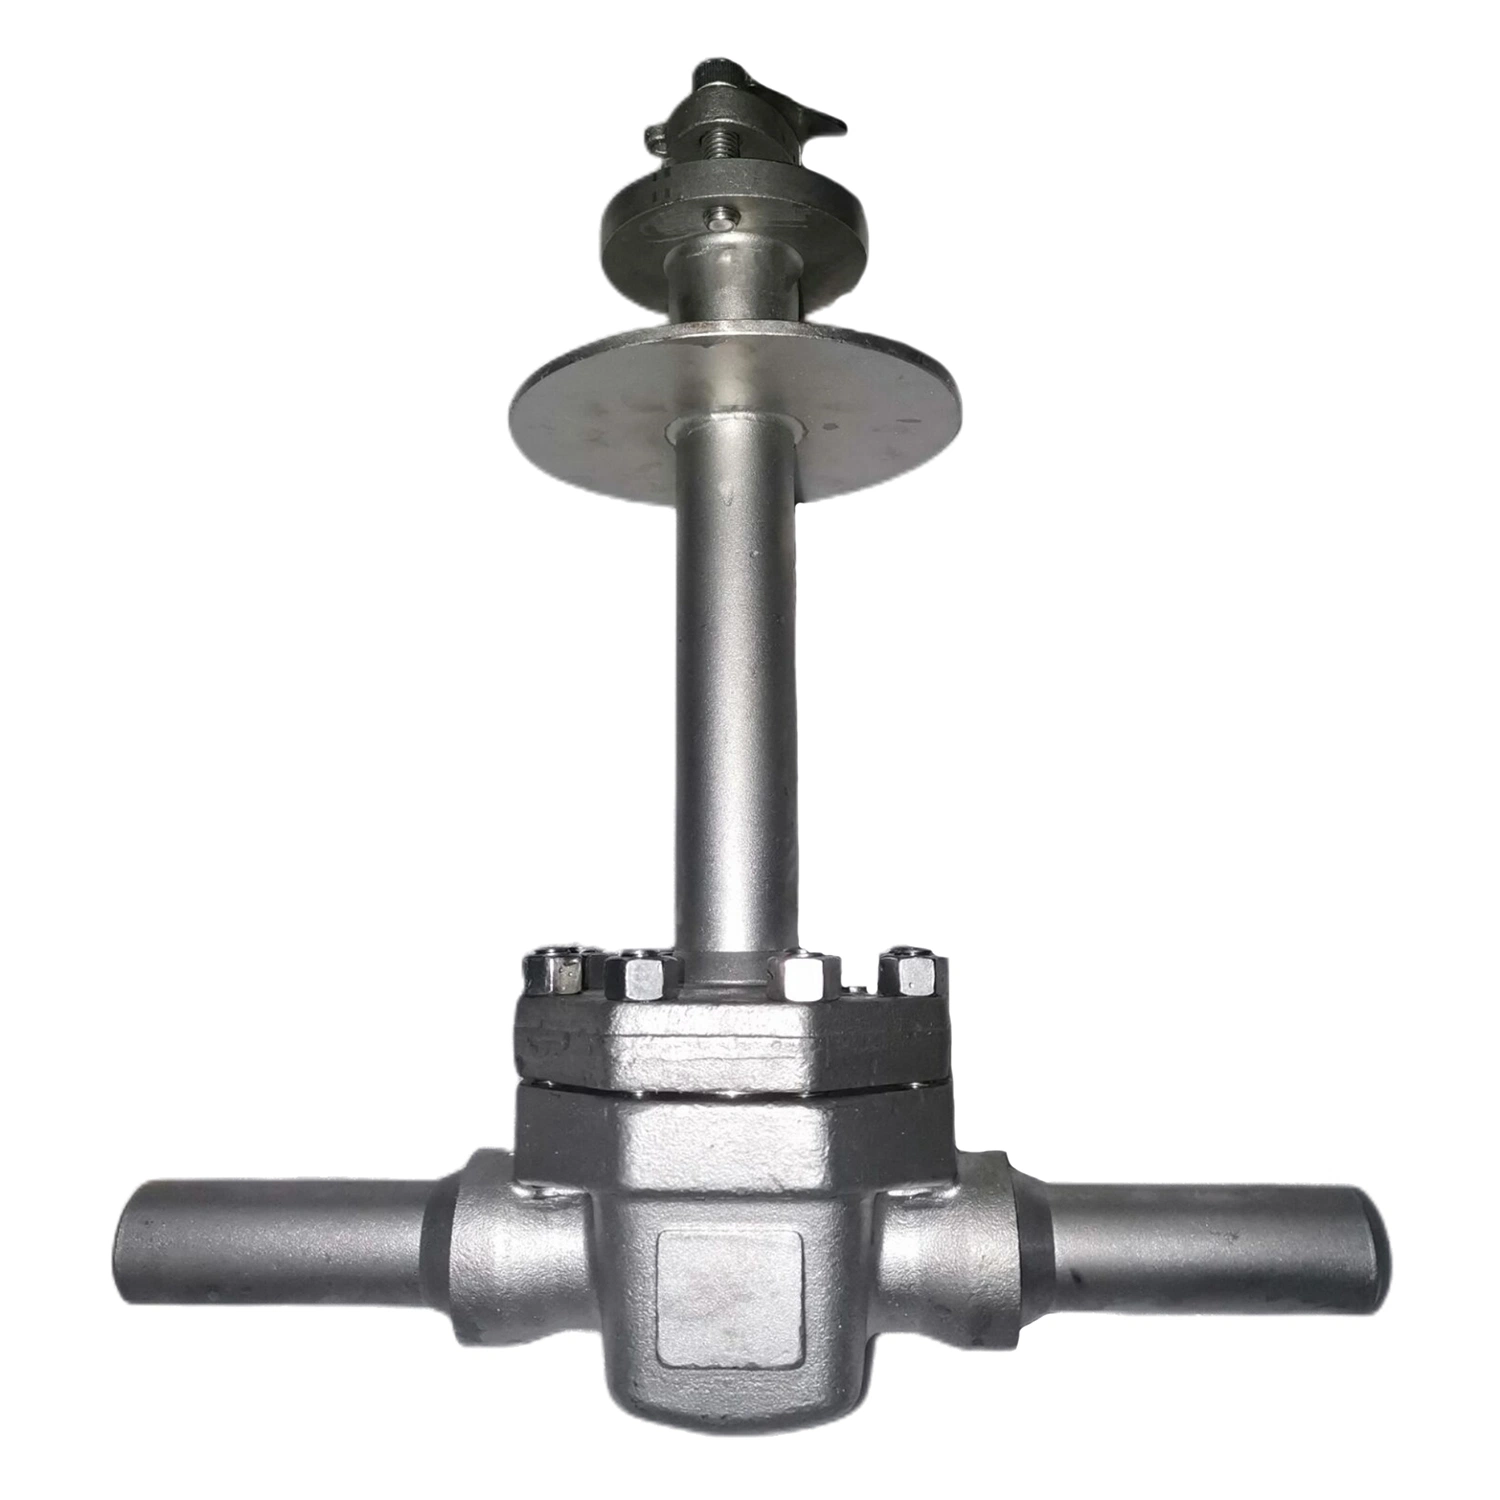 Cryogenic Stainles Steel CF3m CF8m Extended Bonnet Flexible Wedge Flange End Gate Valve